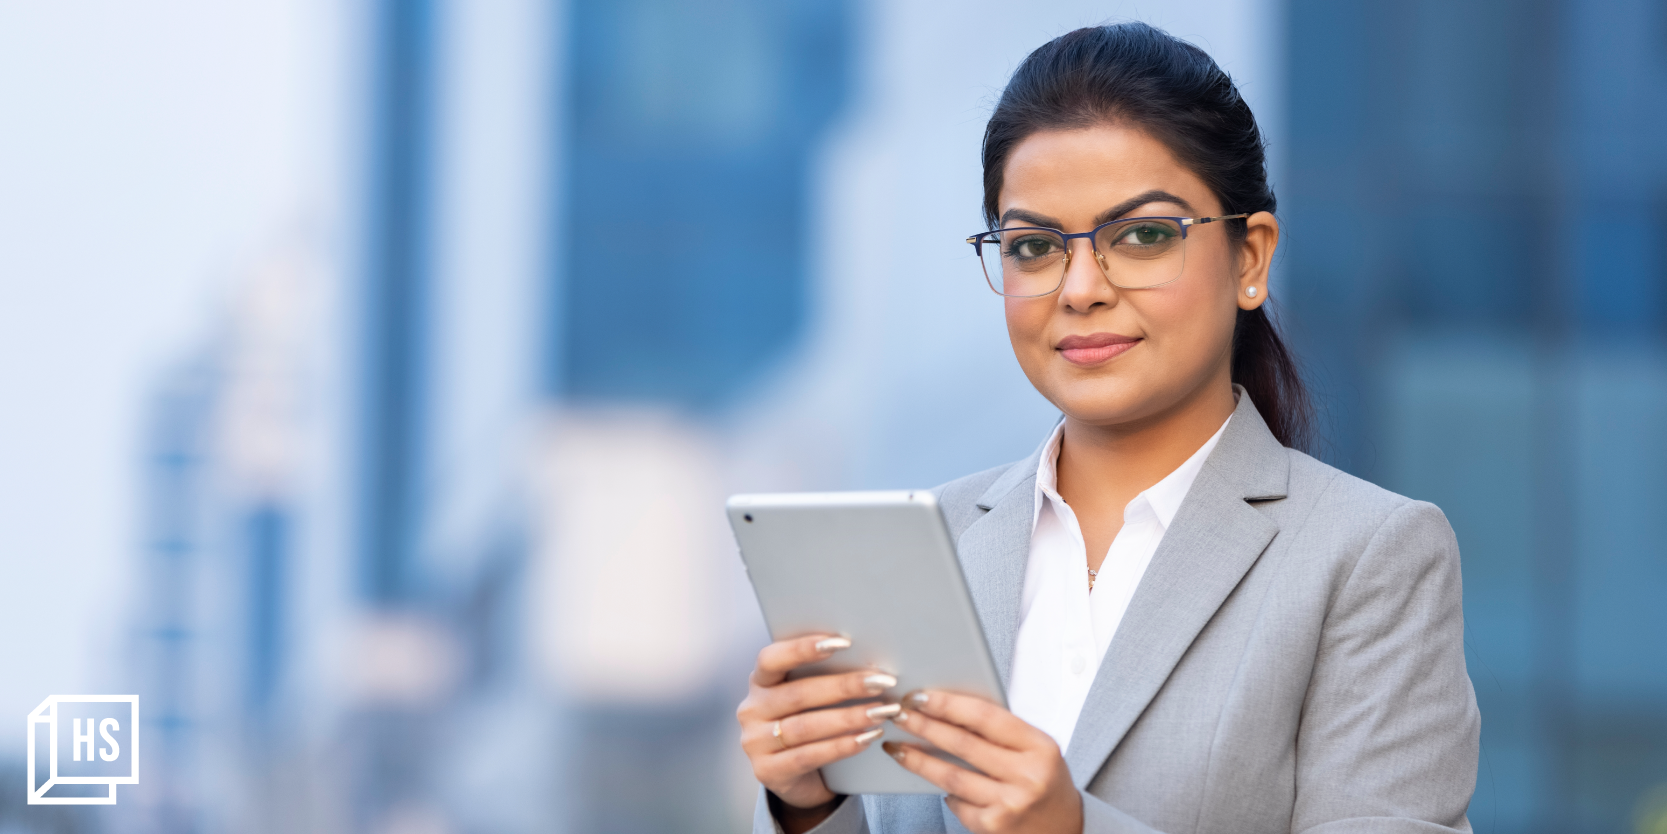 How women are driving growth in the HR technology sector